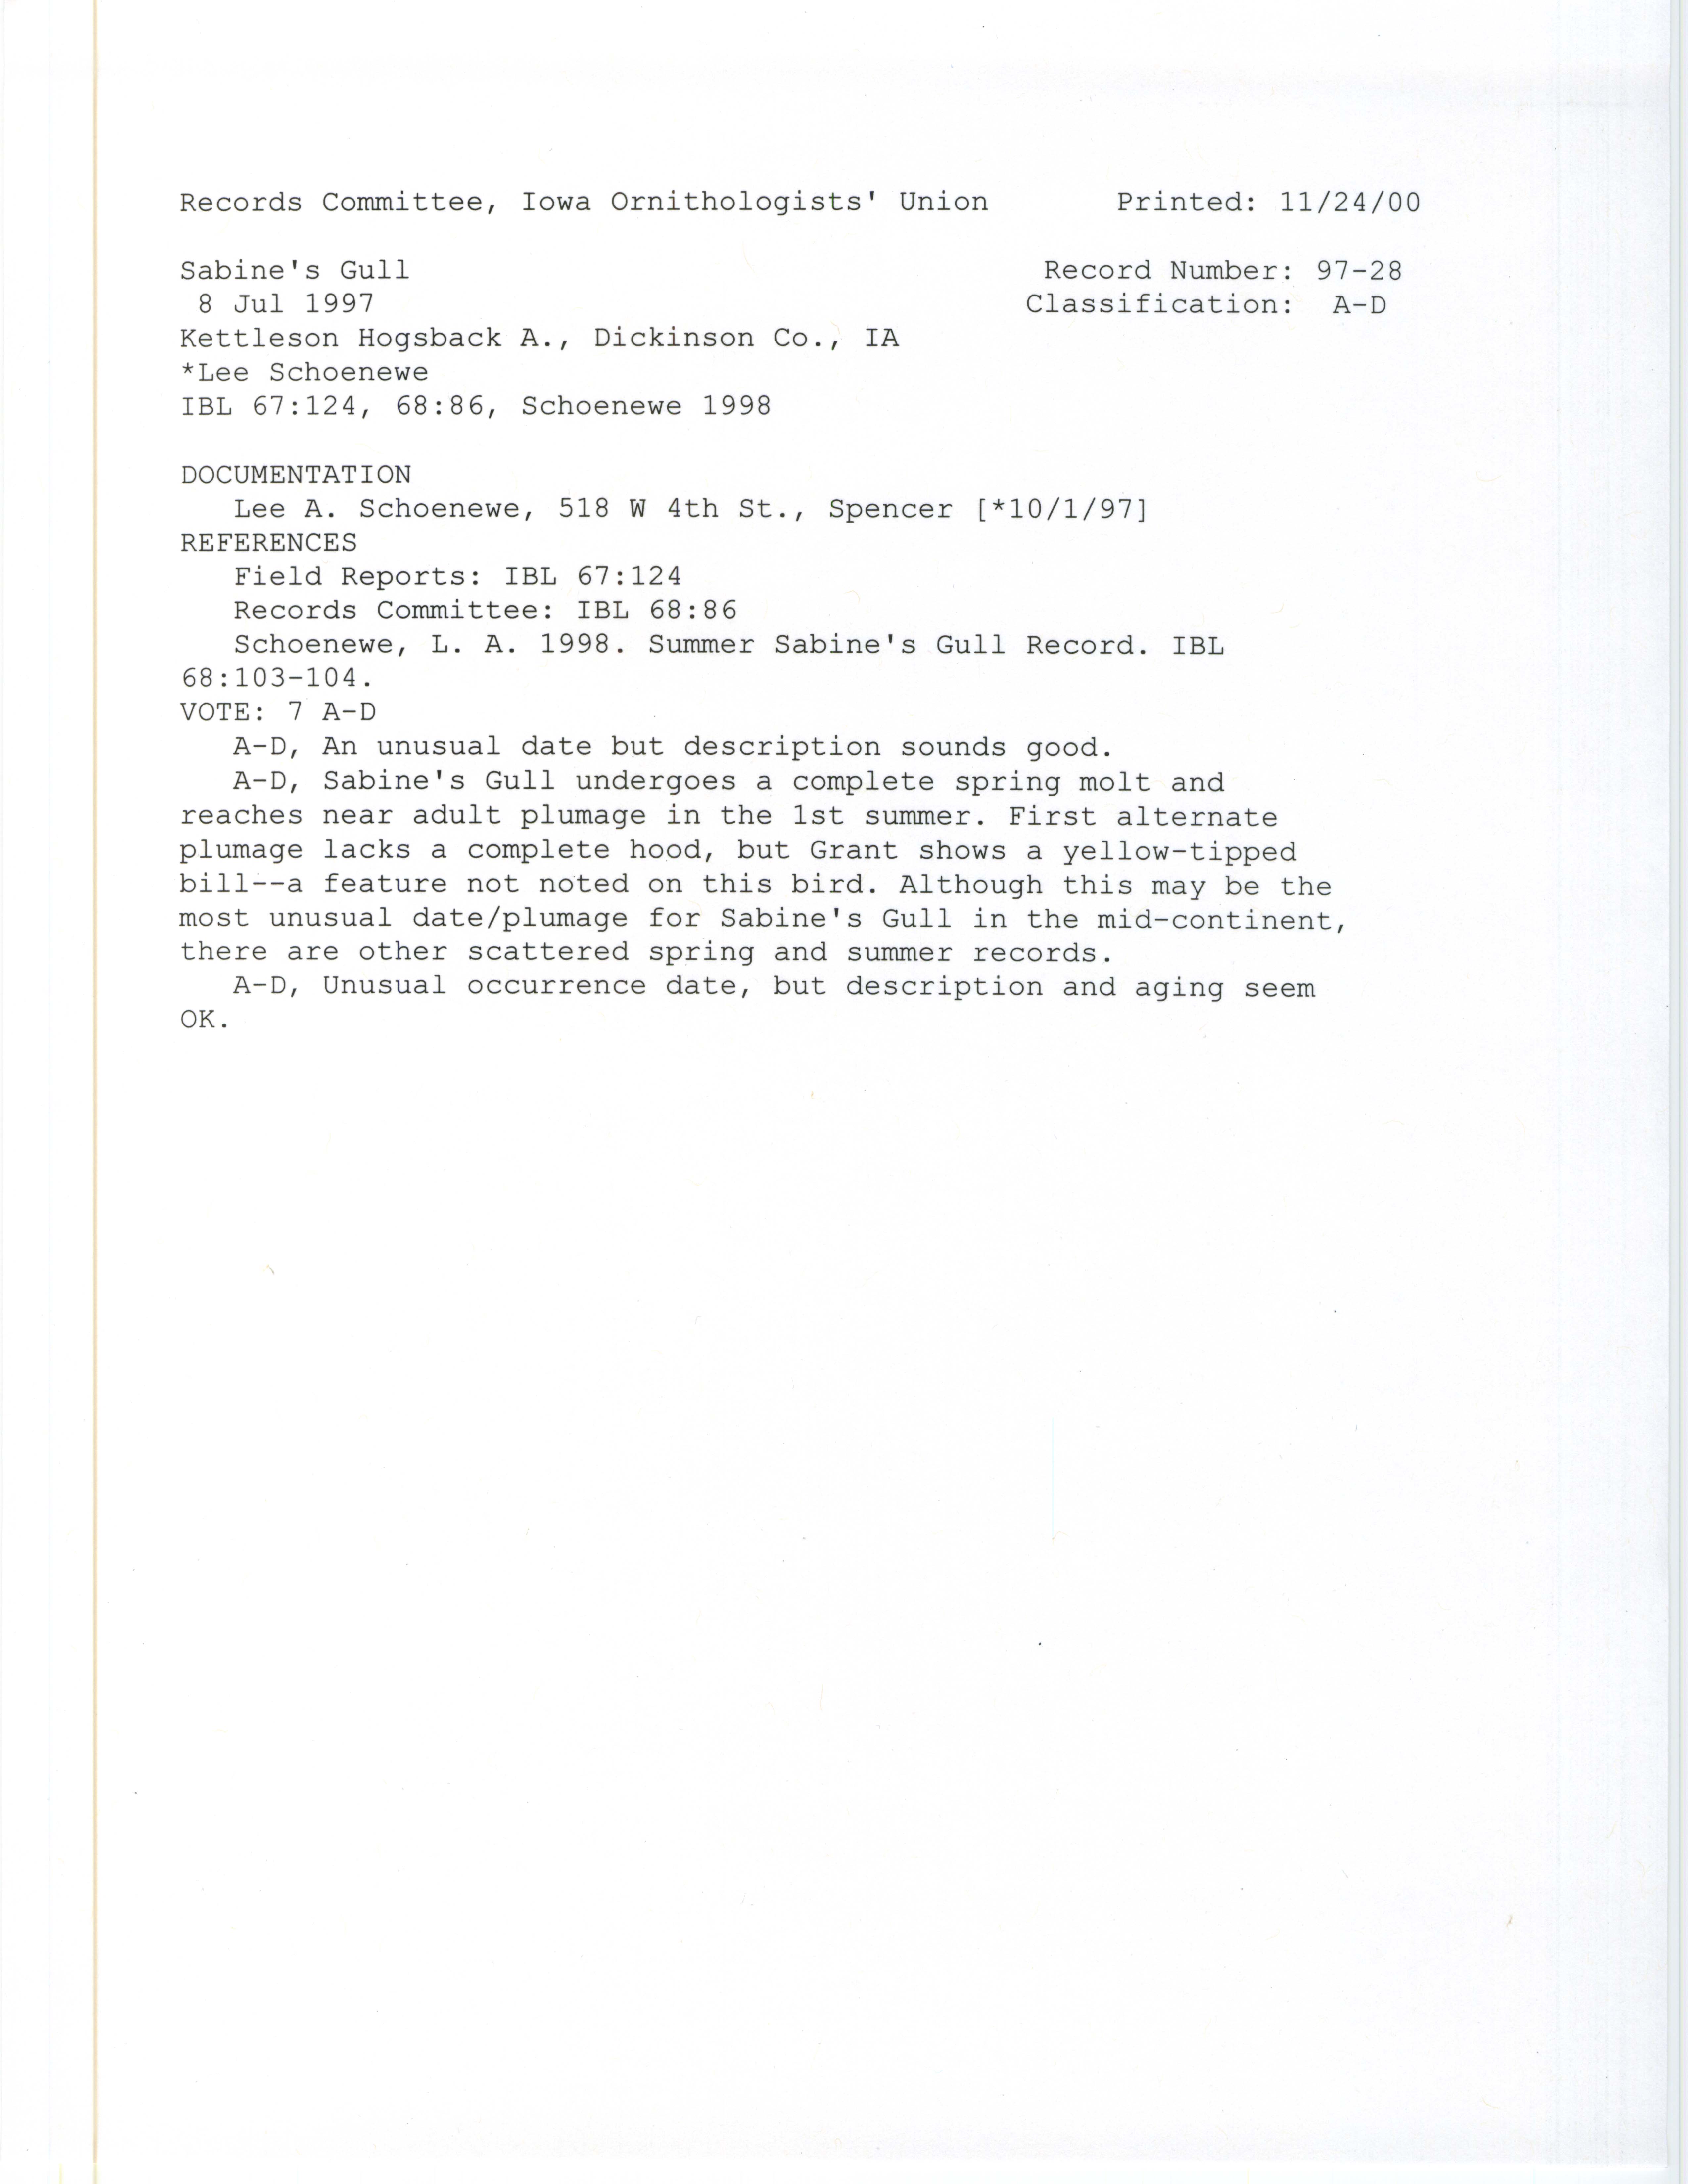 Records Committee review for rare bird sighting of Sabine's Gull at Kettleson Hogsback Area, 1997